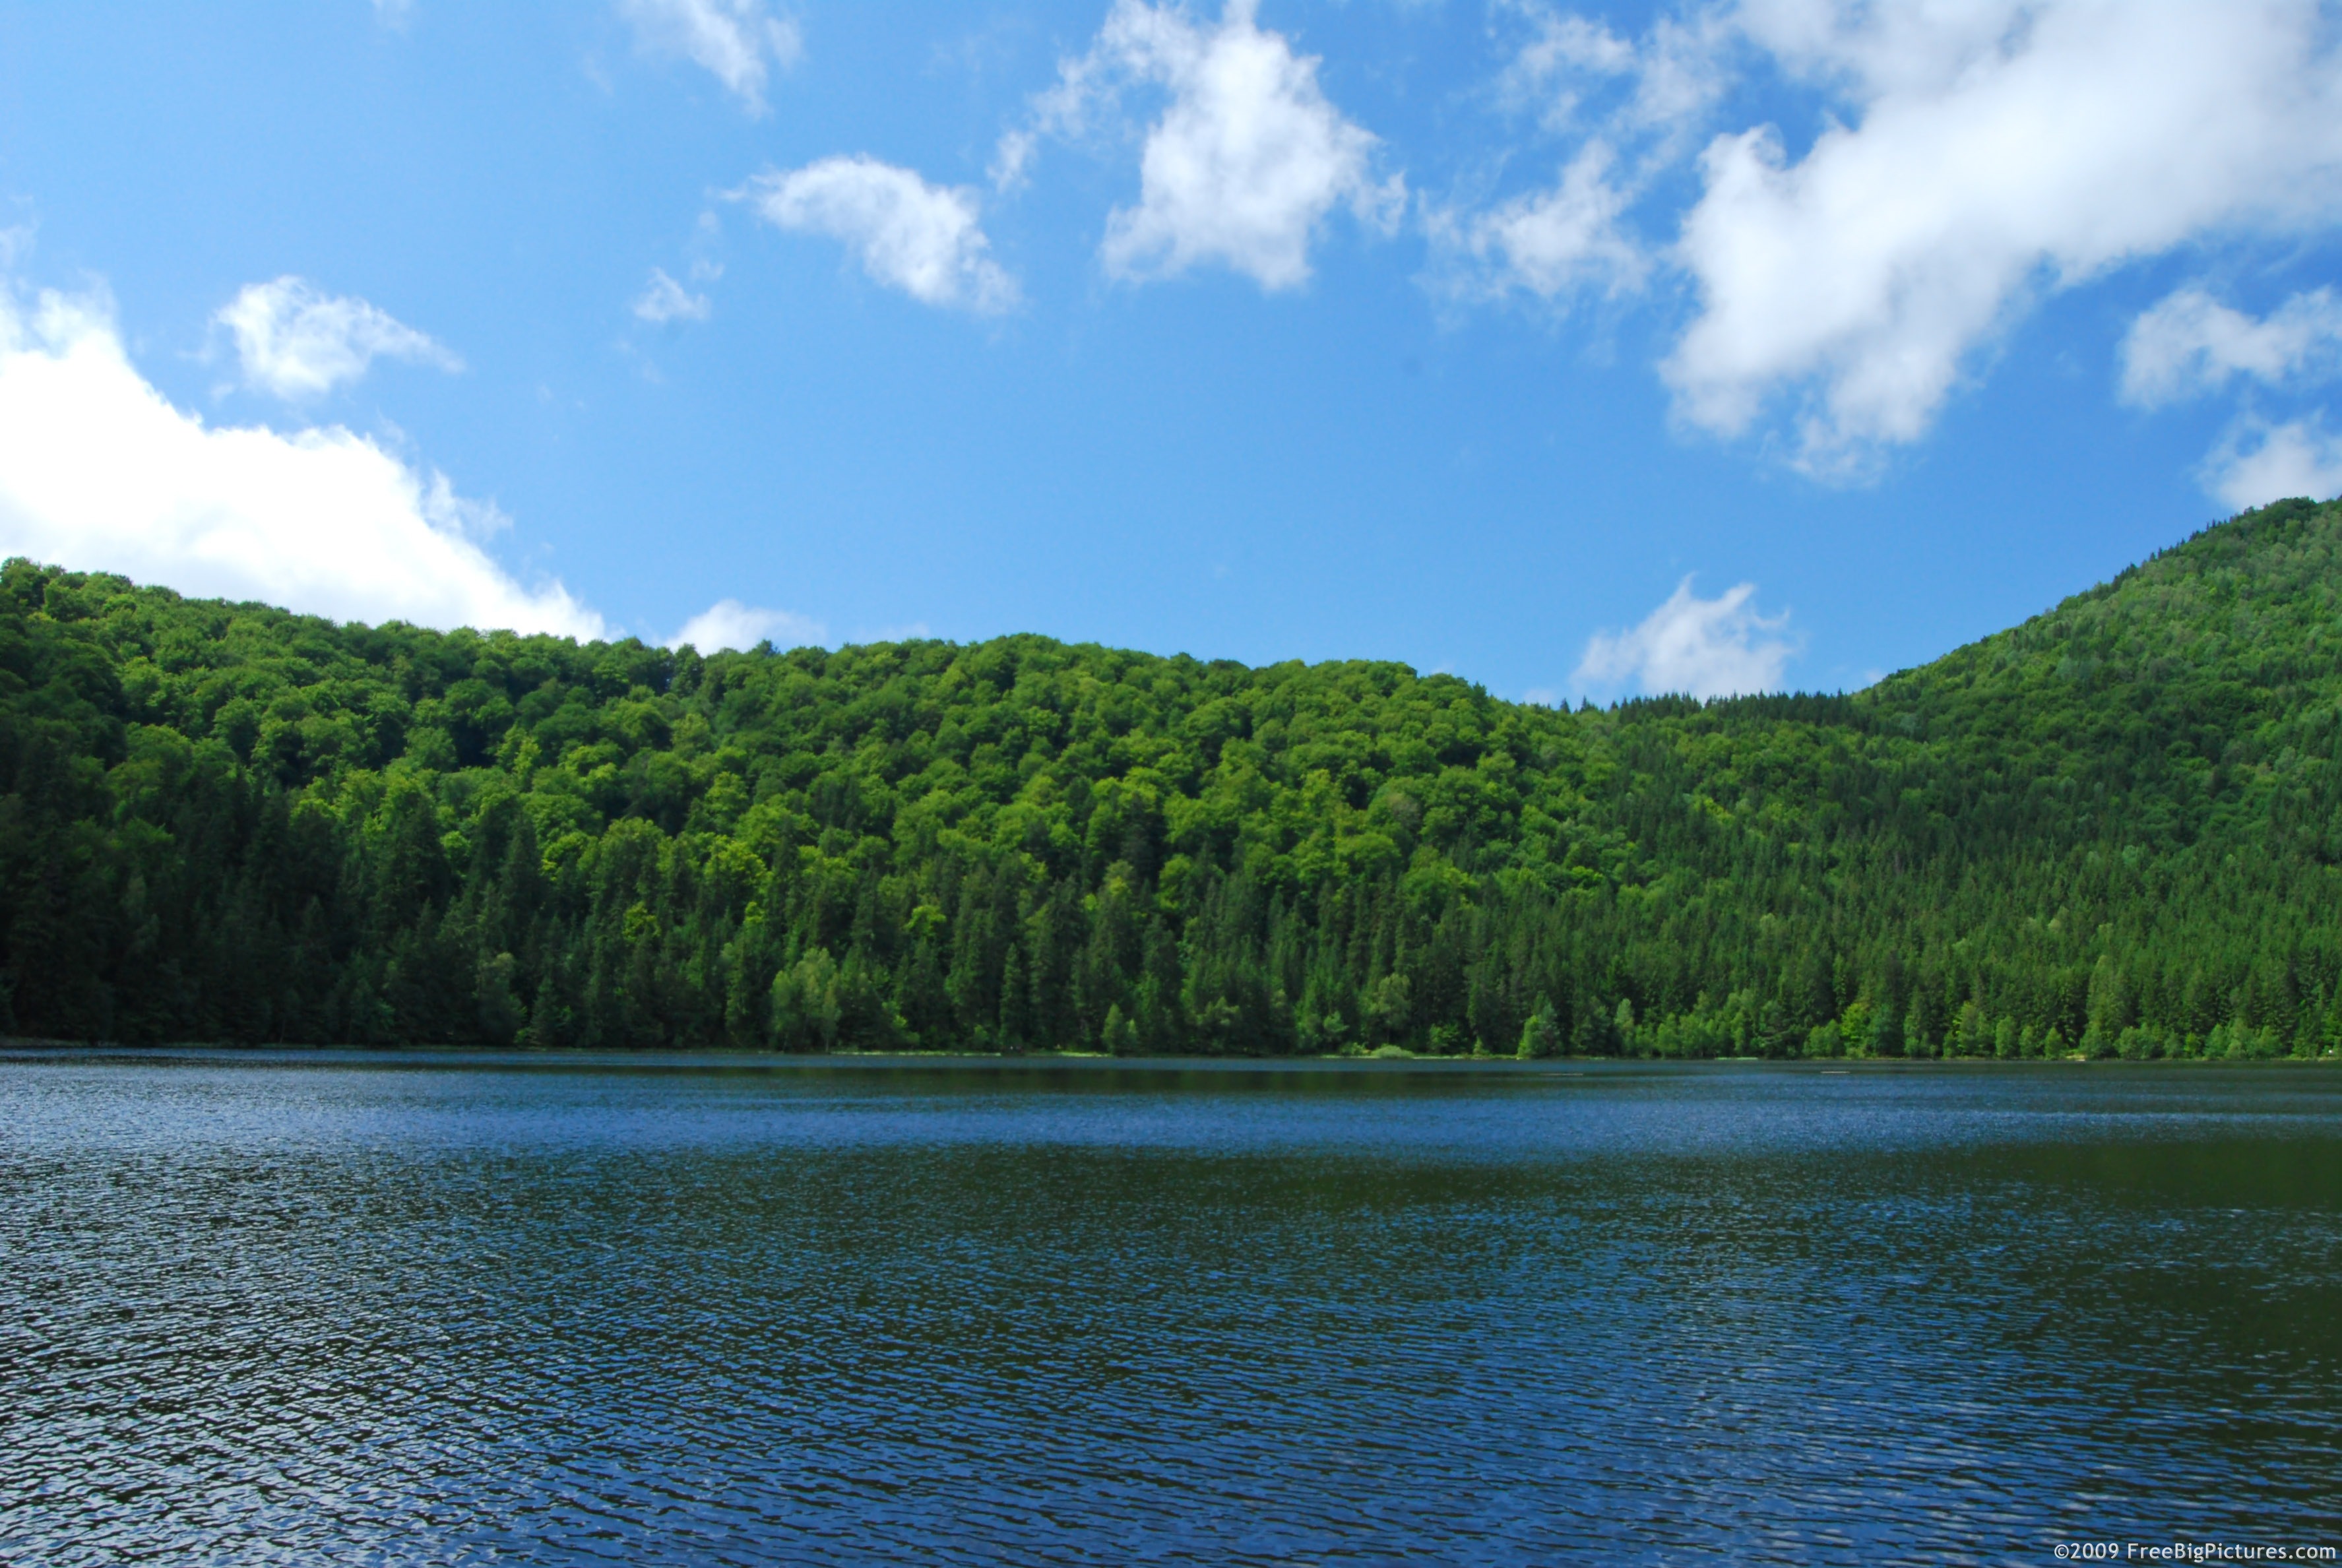 Download this Free High Resolution Pictures Lake Near Forest picture